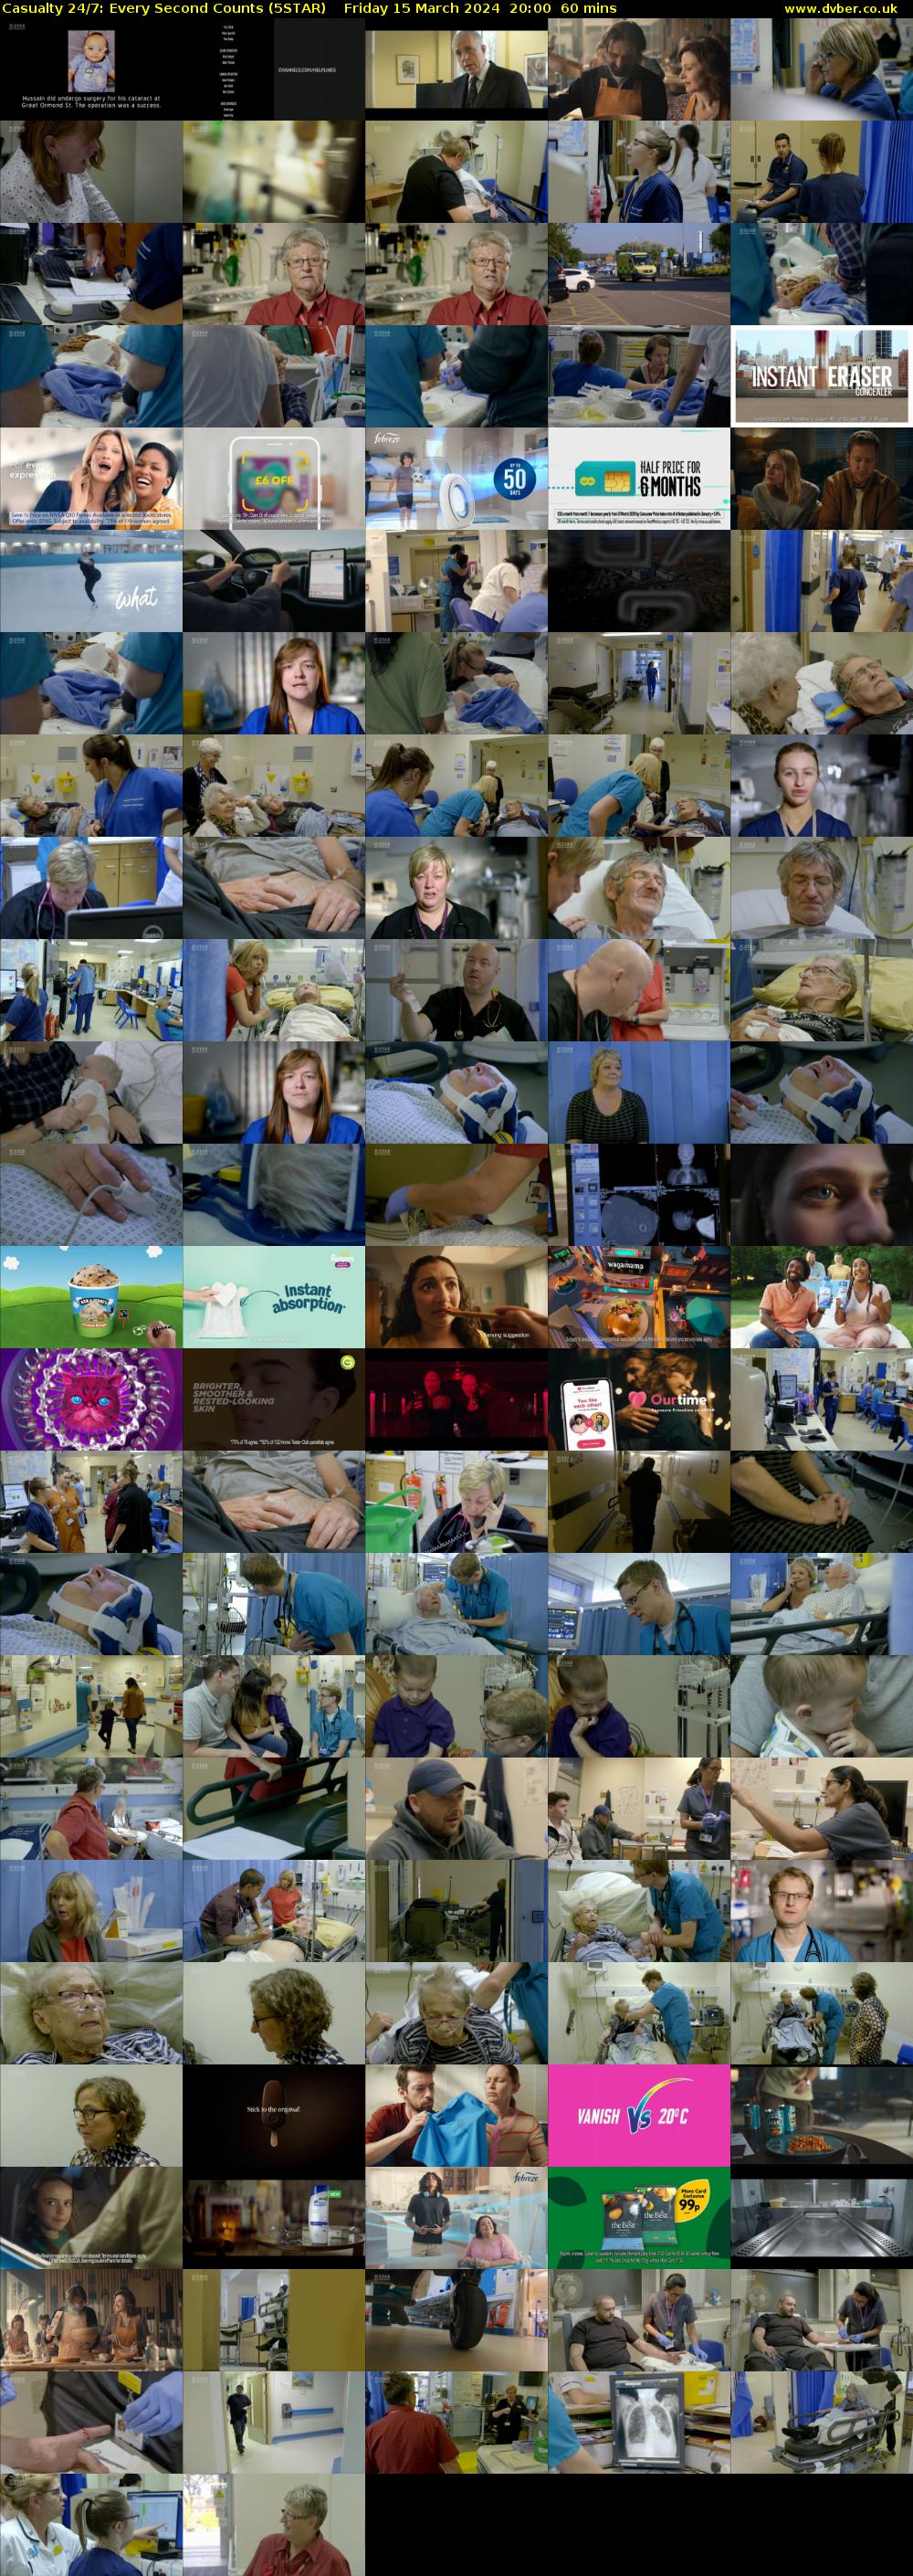 Casualty 24/7: Every Second Counts (5STAR) Friday 15 March 2024 20:00 - 21:00